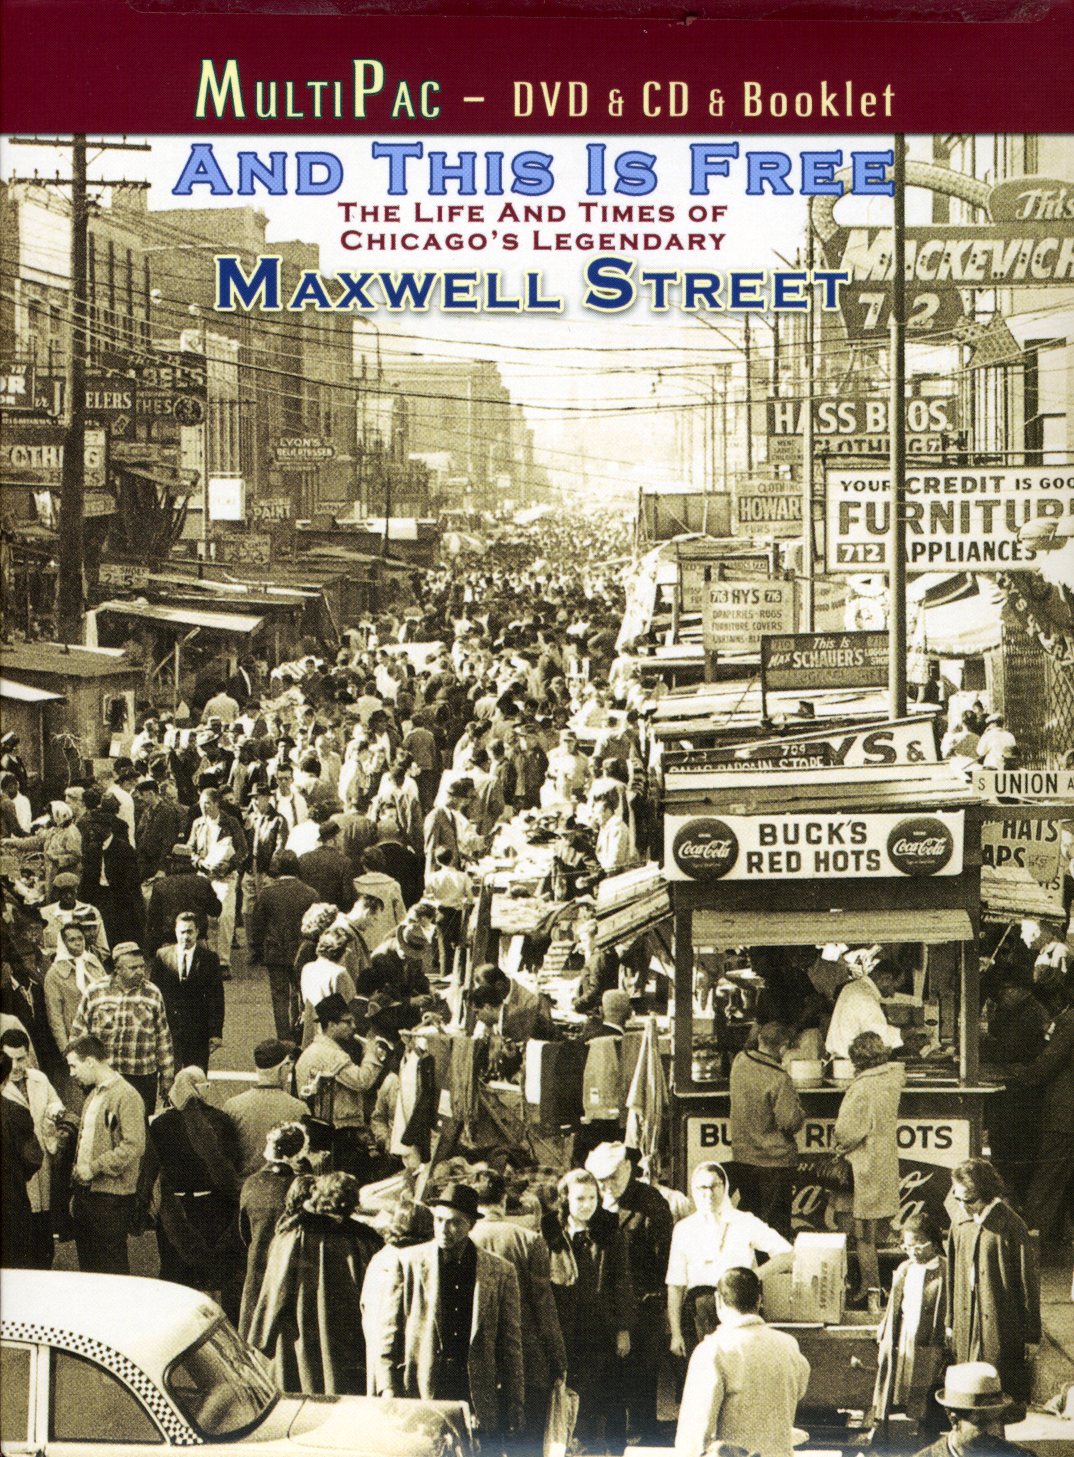 & THIS IS FREE: LIFE & TIME OF MAXWELL STREET